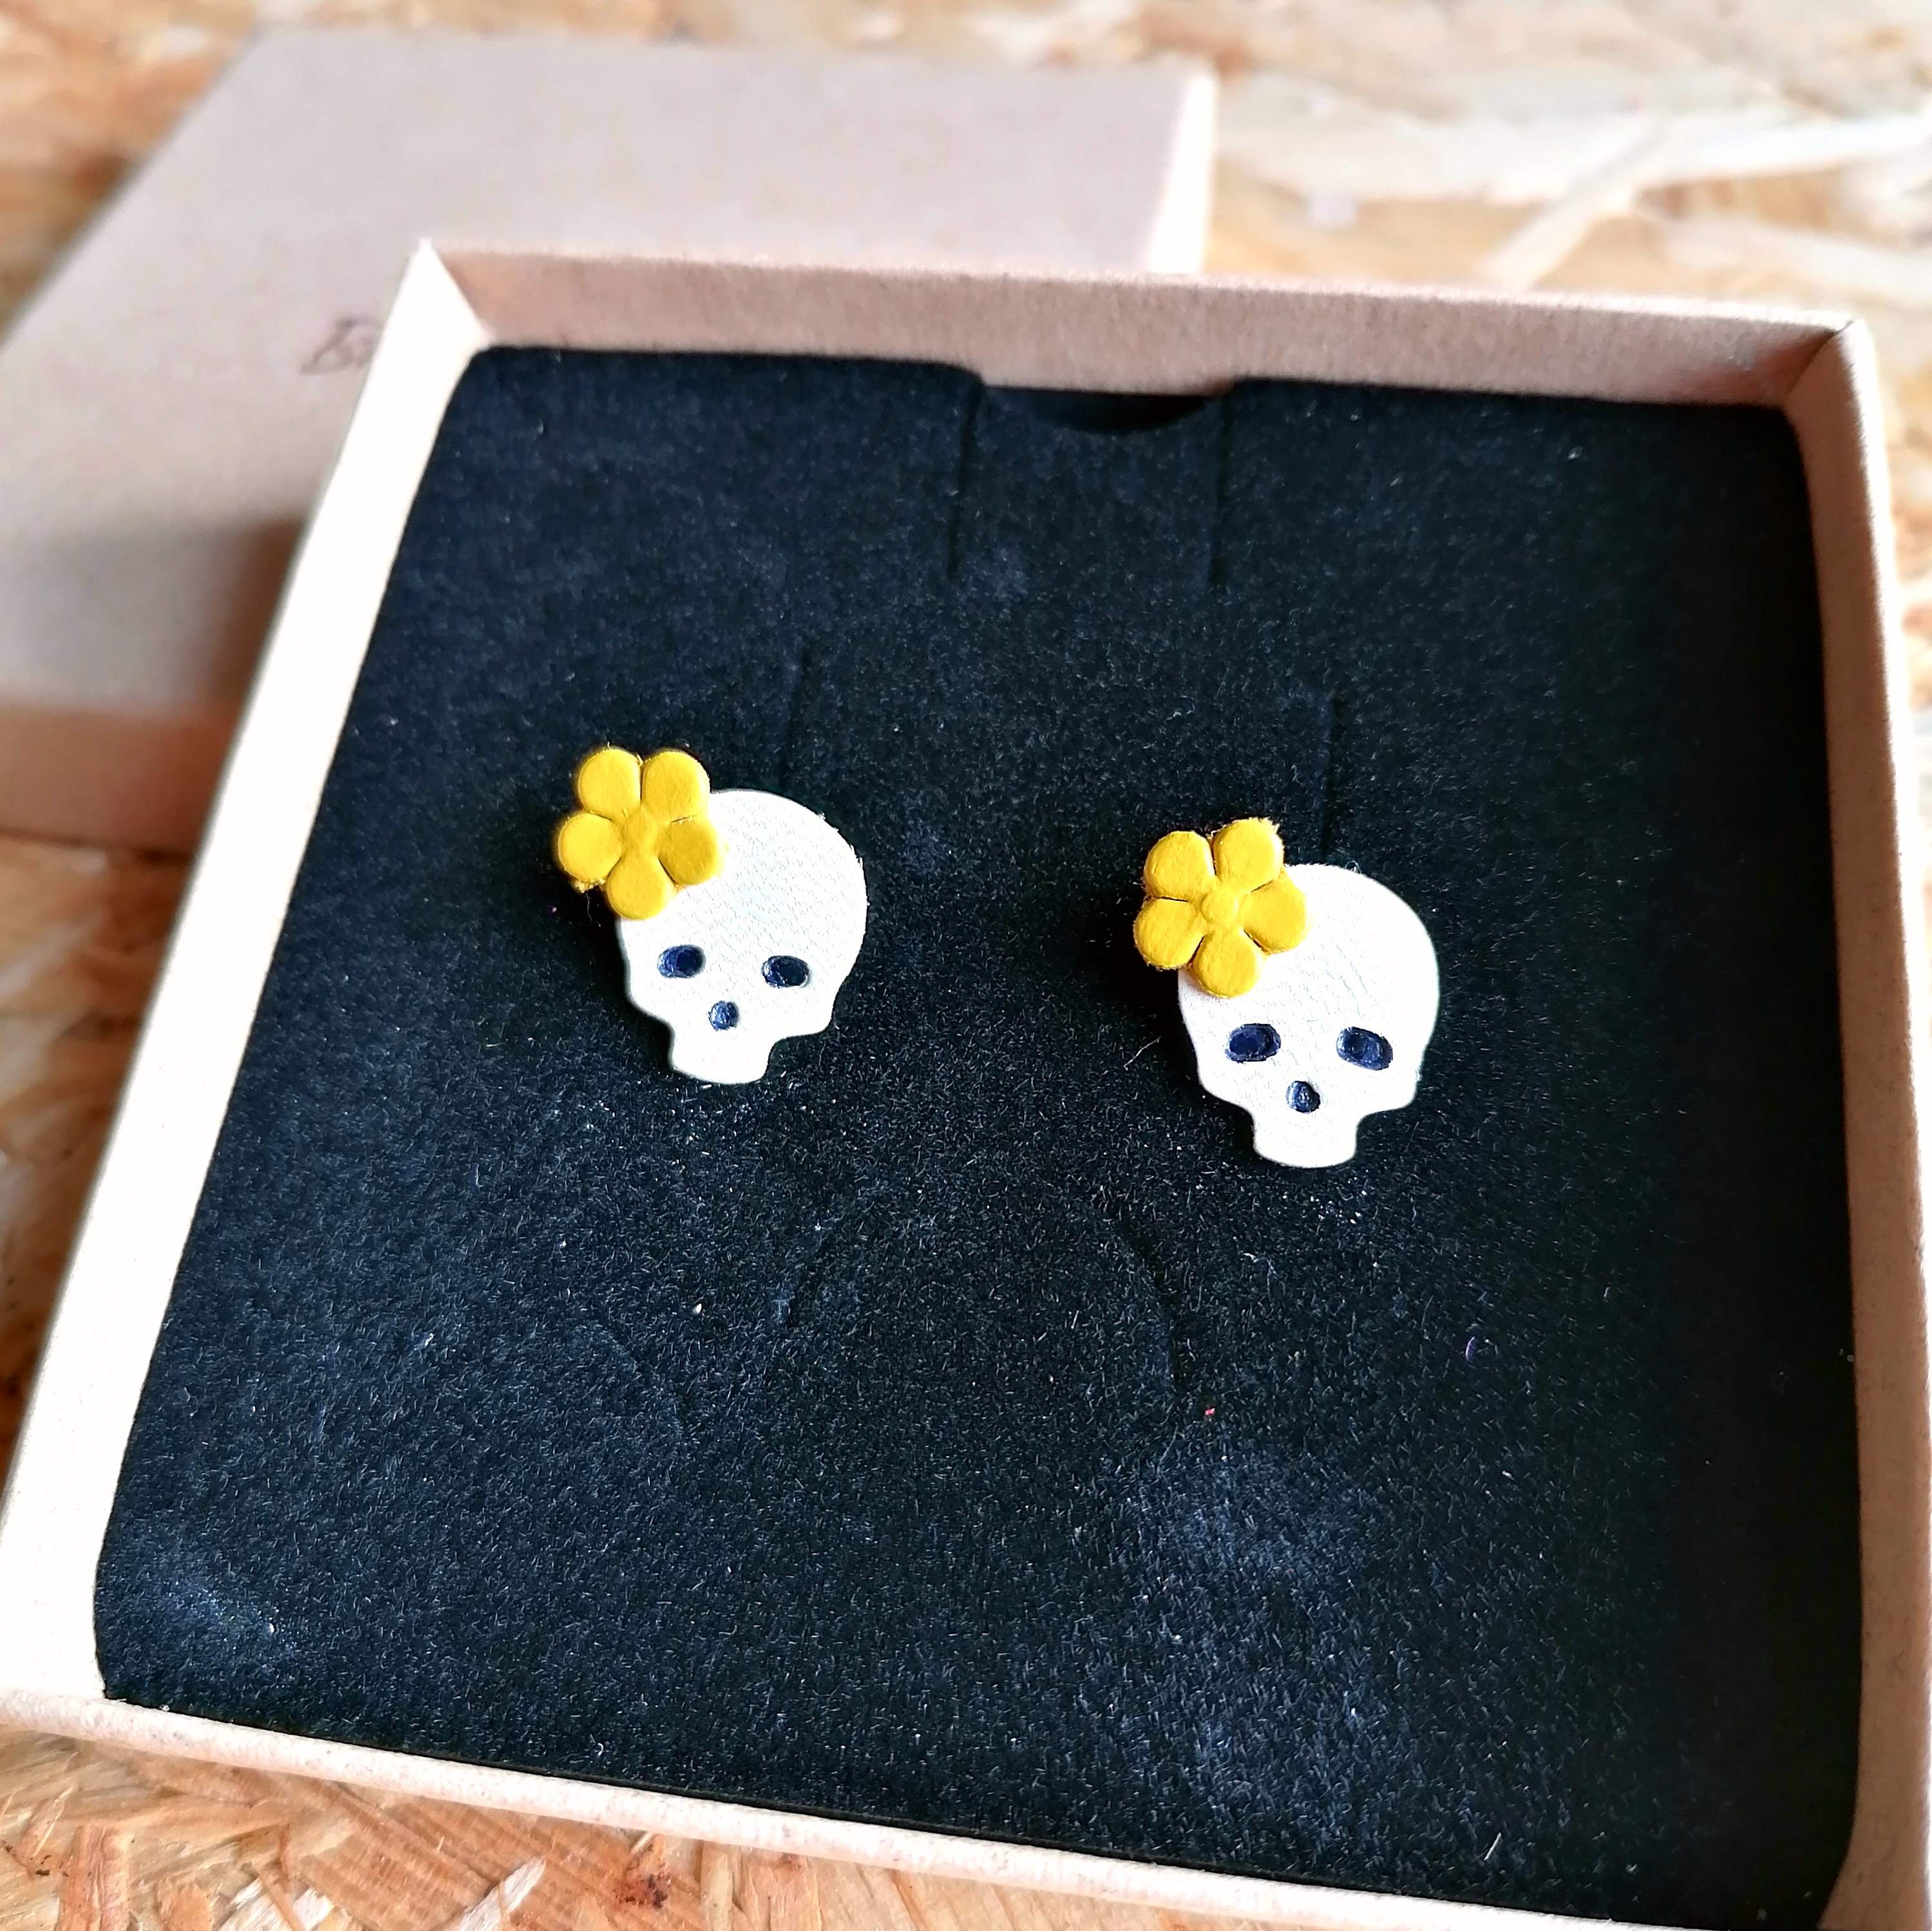 50% OFF Spoopy Skull Recycled Leather Stud